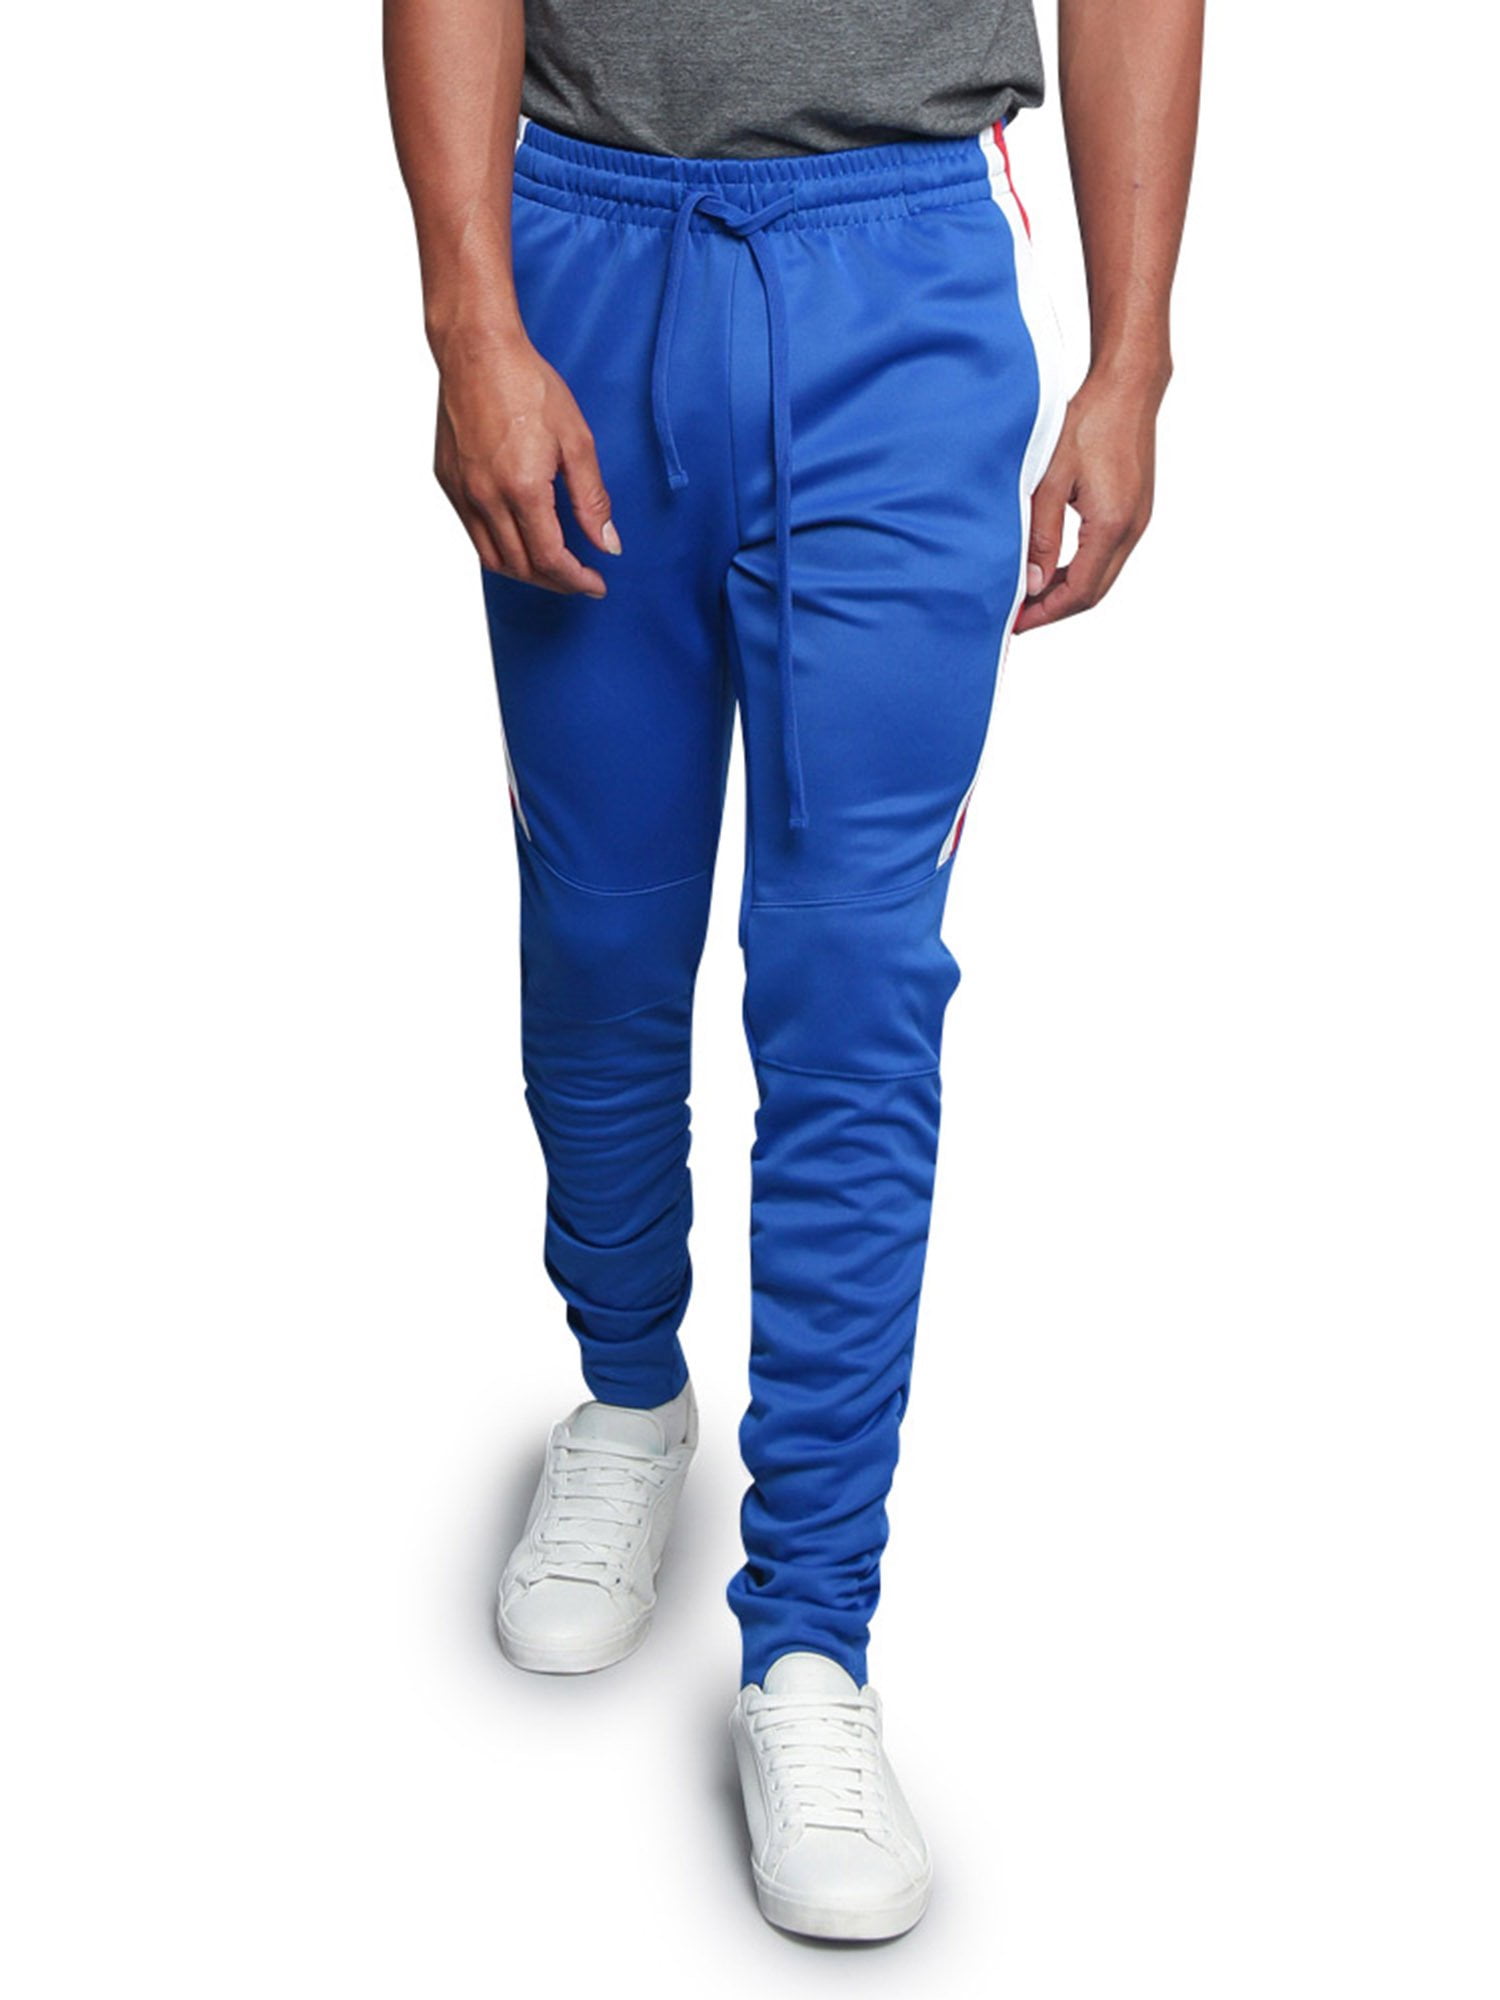 Men's Scrunched Bungee Striped  Workout Drawstring Techno Track Pants TR546-E10A 